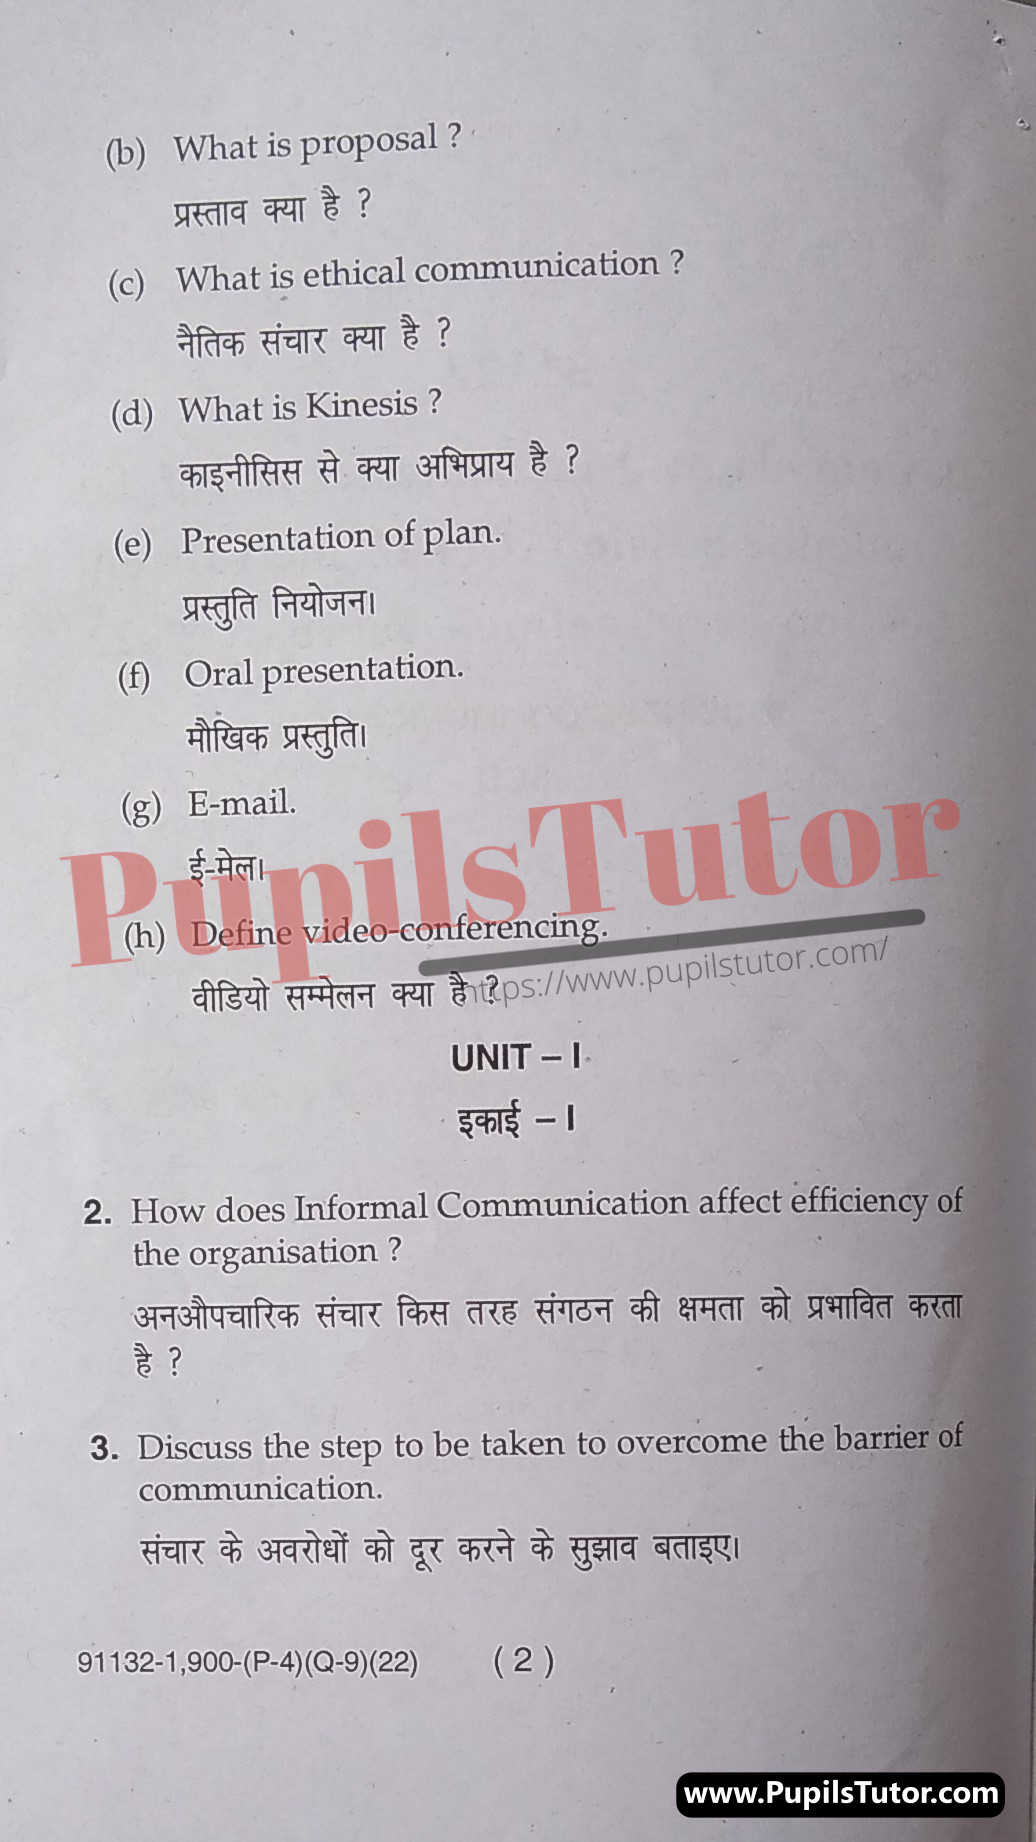 M.D. University B.Com. Business Communication First Semester Important Question Answer And Solution - www.pupilstutor.com (Paper Page Number 2)